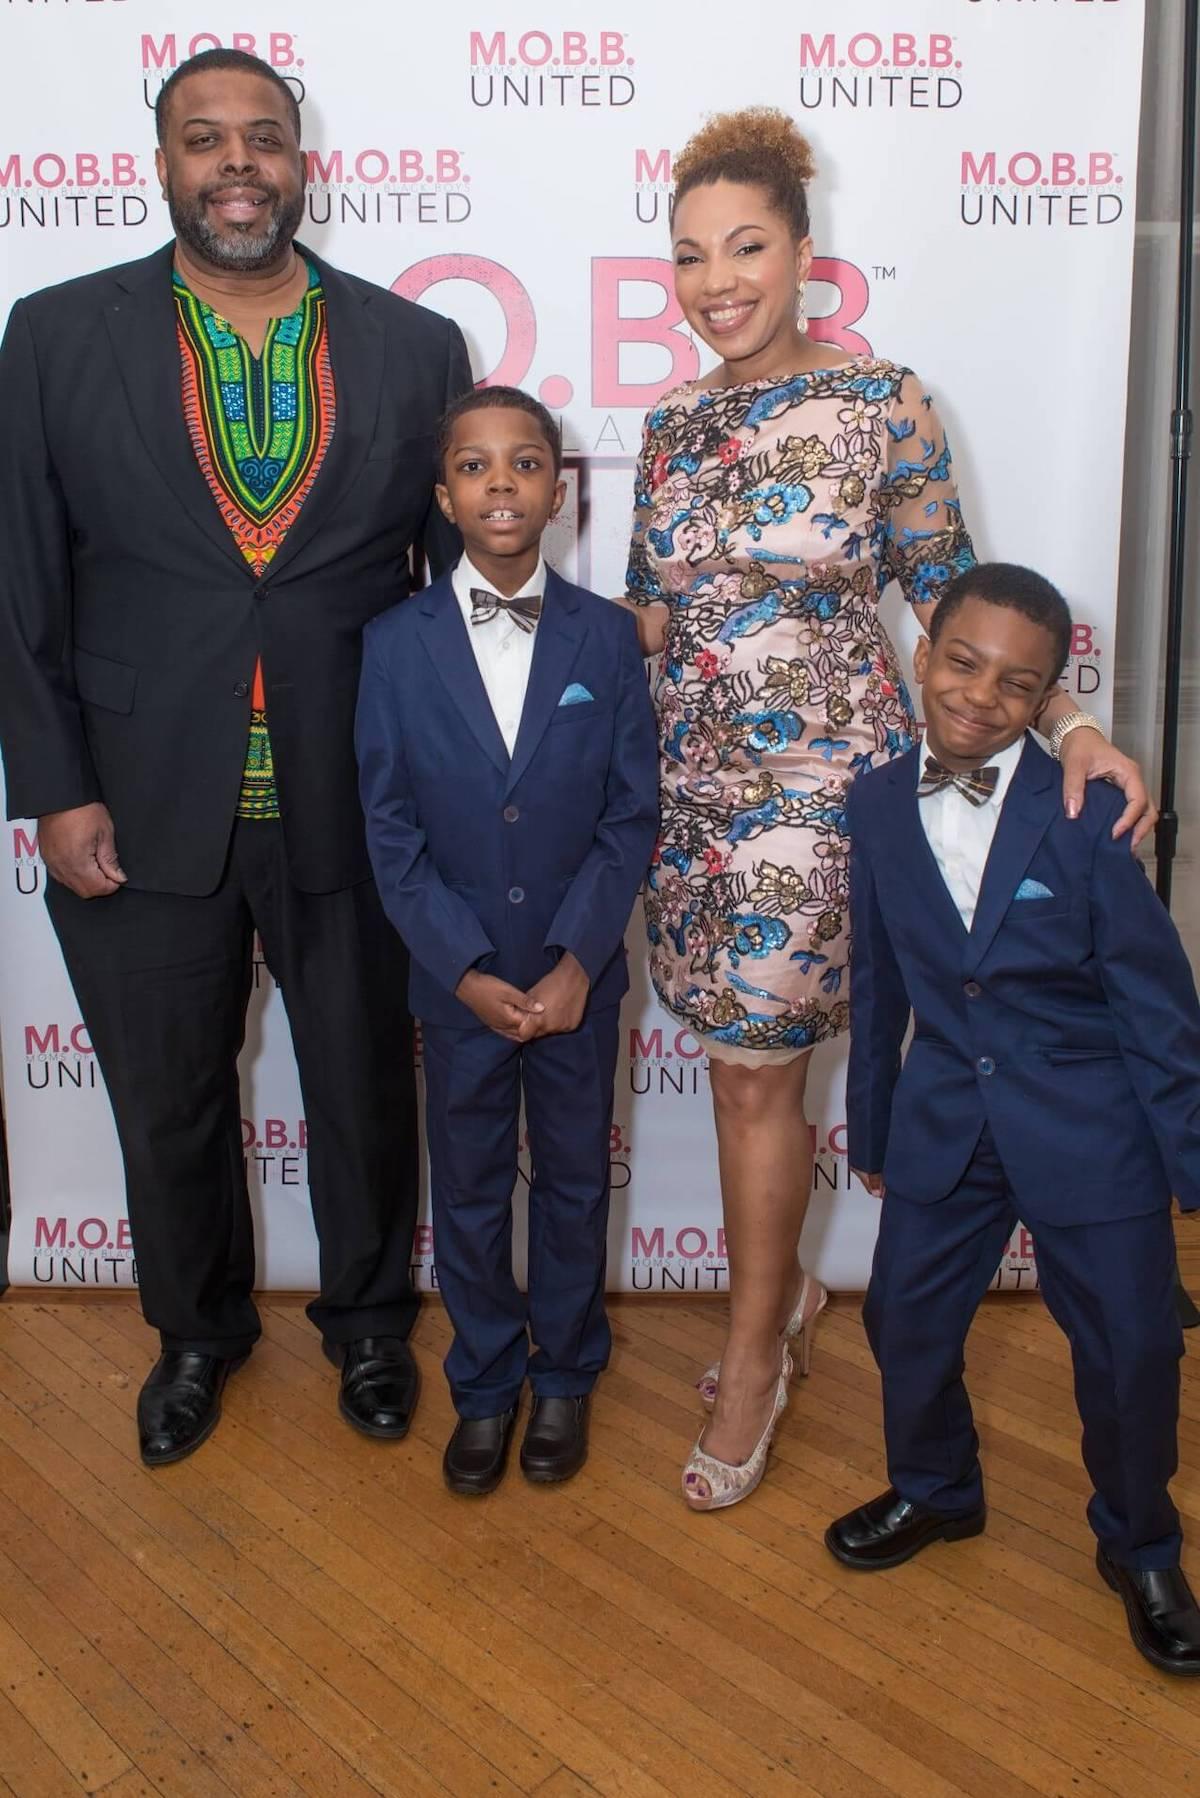 David Neal McGruder and Depelsha McGruder with their two sons.